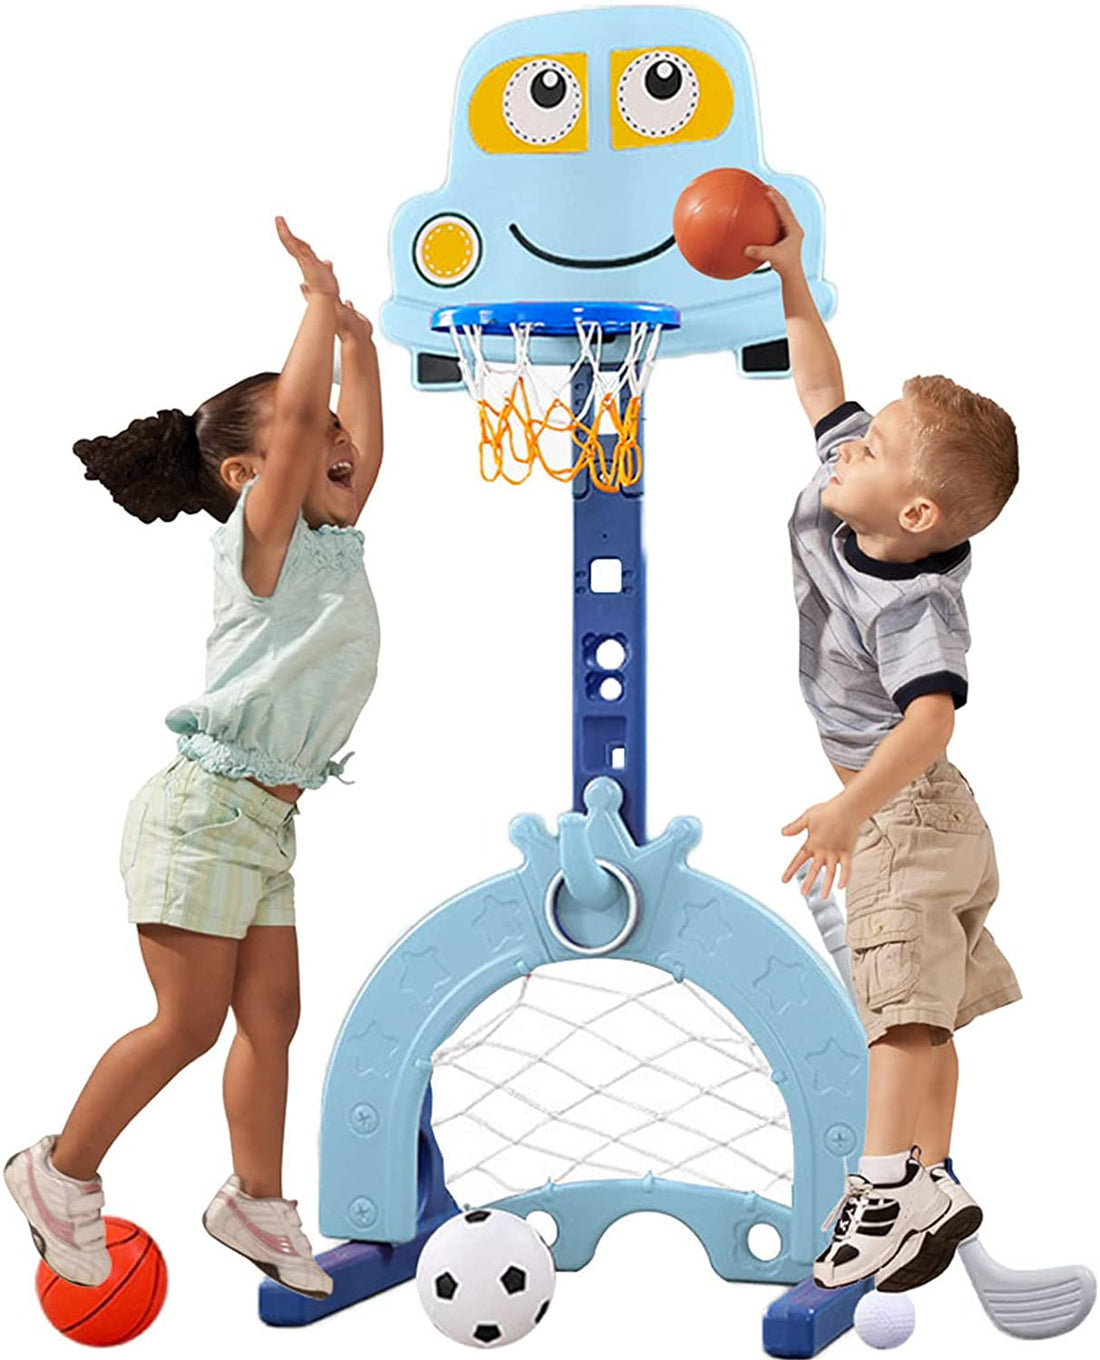 EALING BABY 5-in-1 Toddler Basketball Hoop IndoorSports Activity Center -Soccer Goal, Golf, Ring Toss -Durable Play SetWith Balls, Clubs, Pump, Rings -Multi-functionIndoorToddler Sports Toy For Kids 3-12 Years Old –Blue